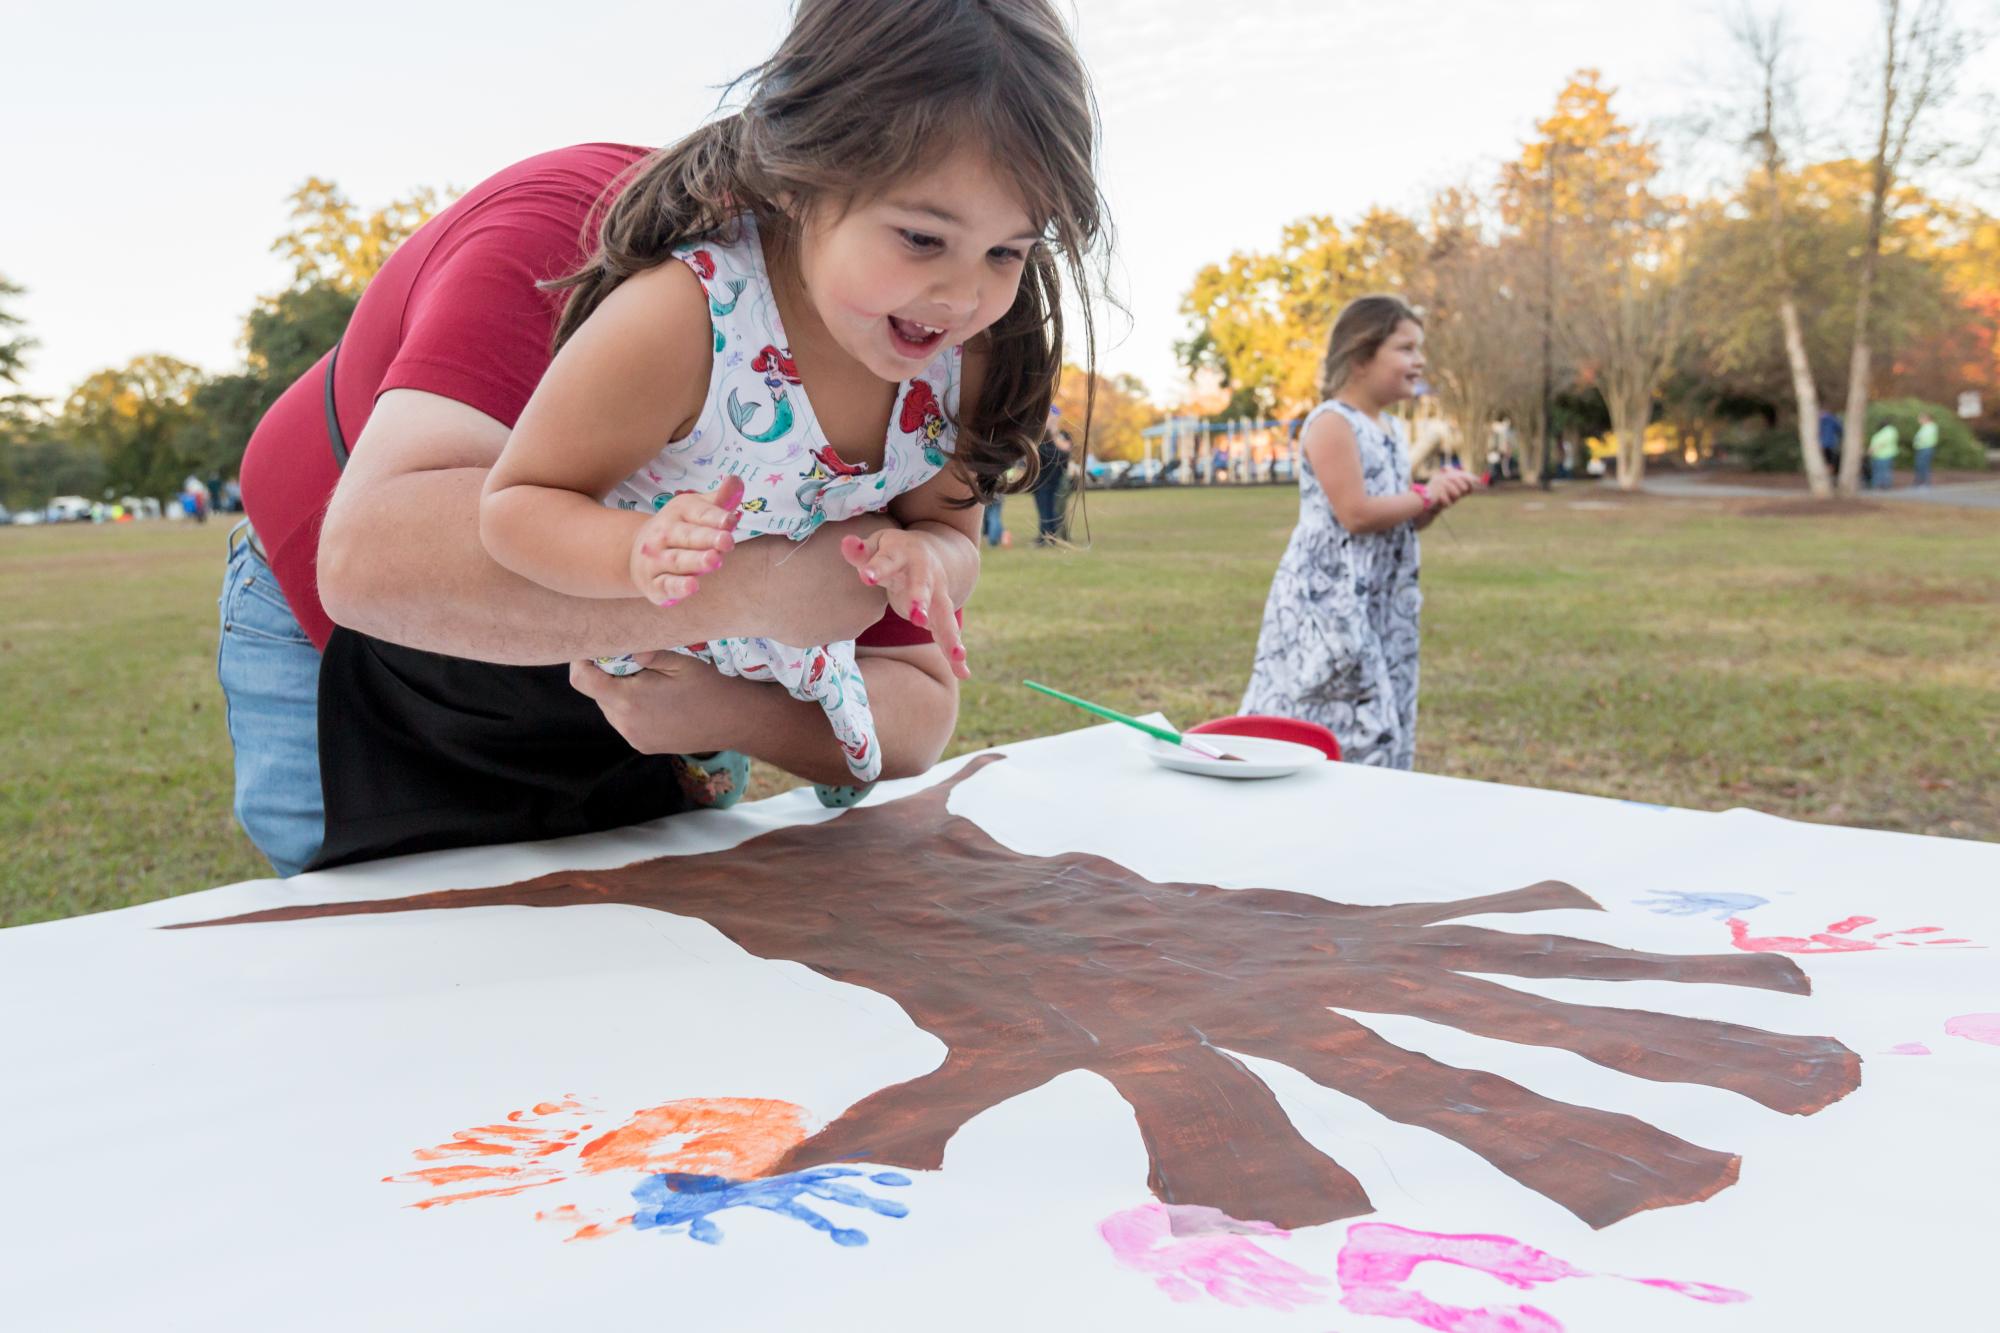 Little girl participating in a community art project